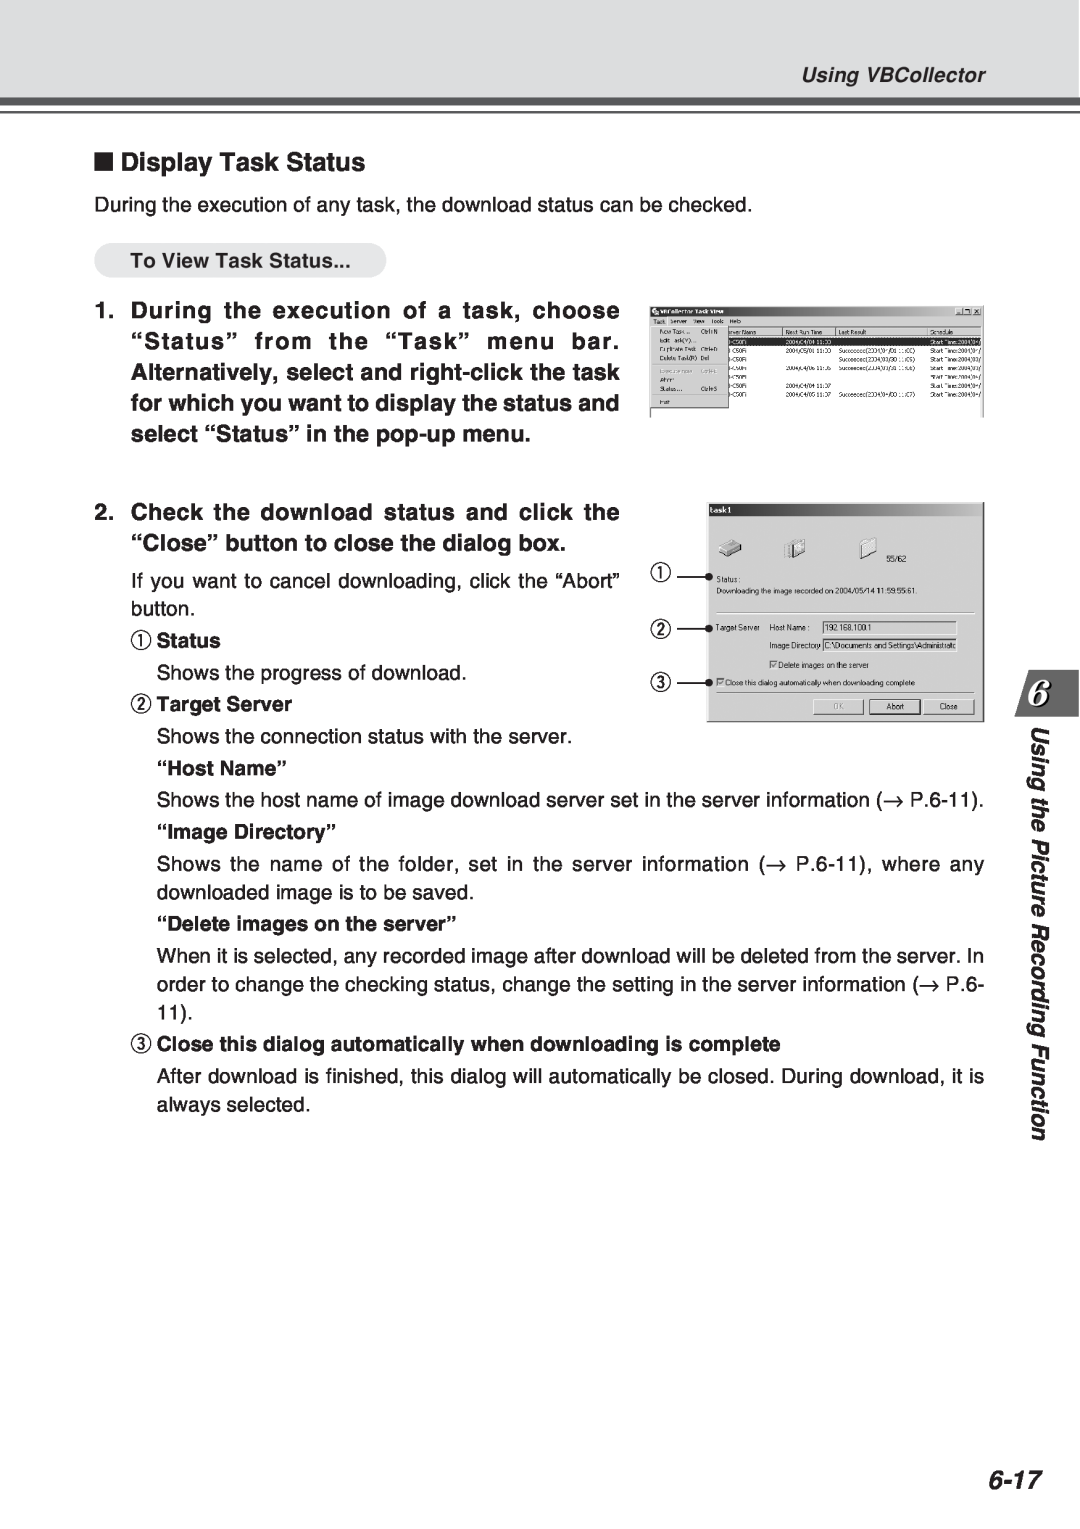 Canon Vb-C50fi user manual Display Task Status, 6-17, Using the Picture Recor ding Function, To View Task Status, q Status 